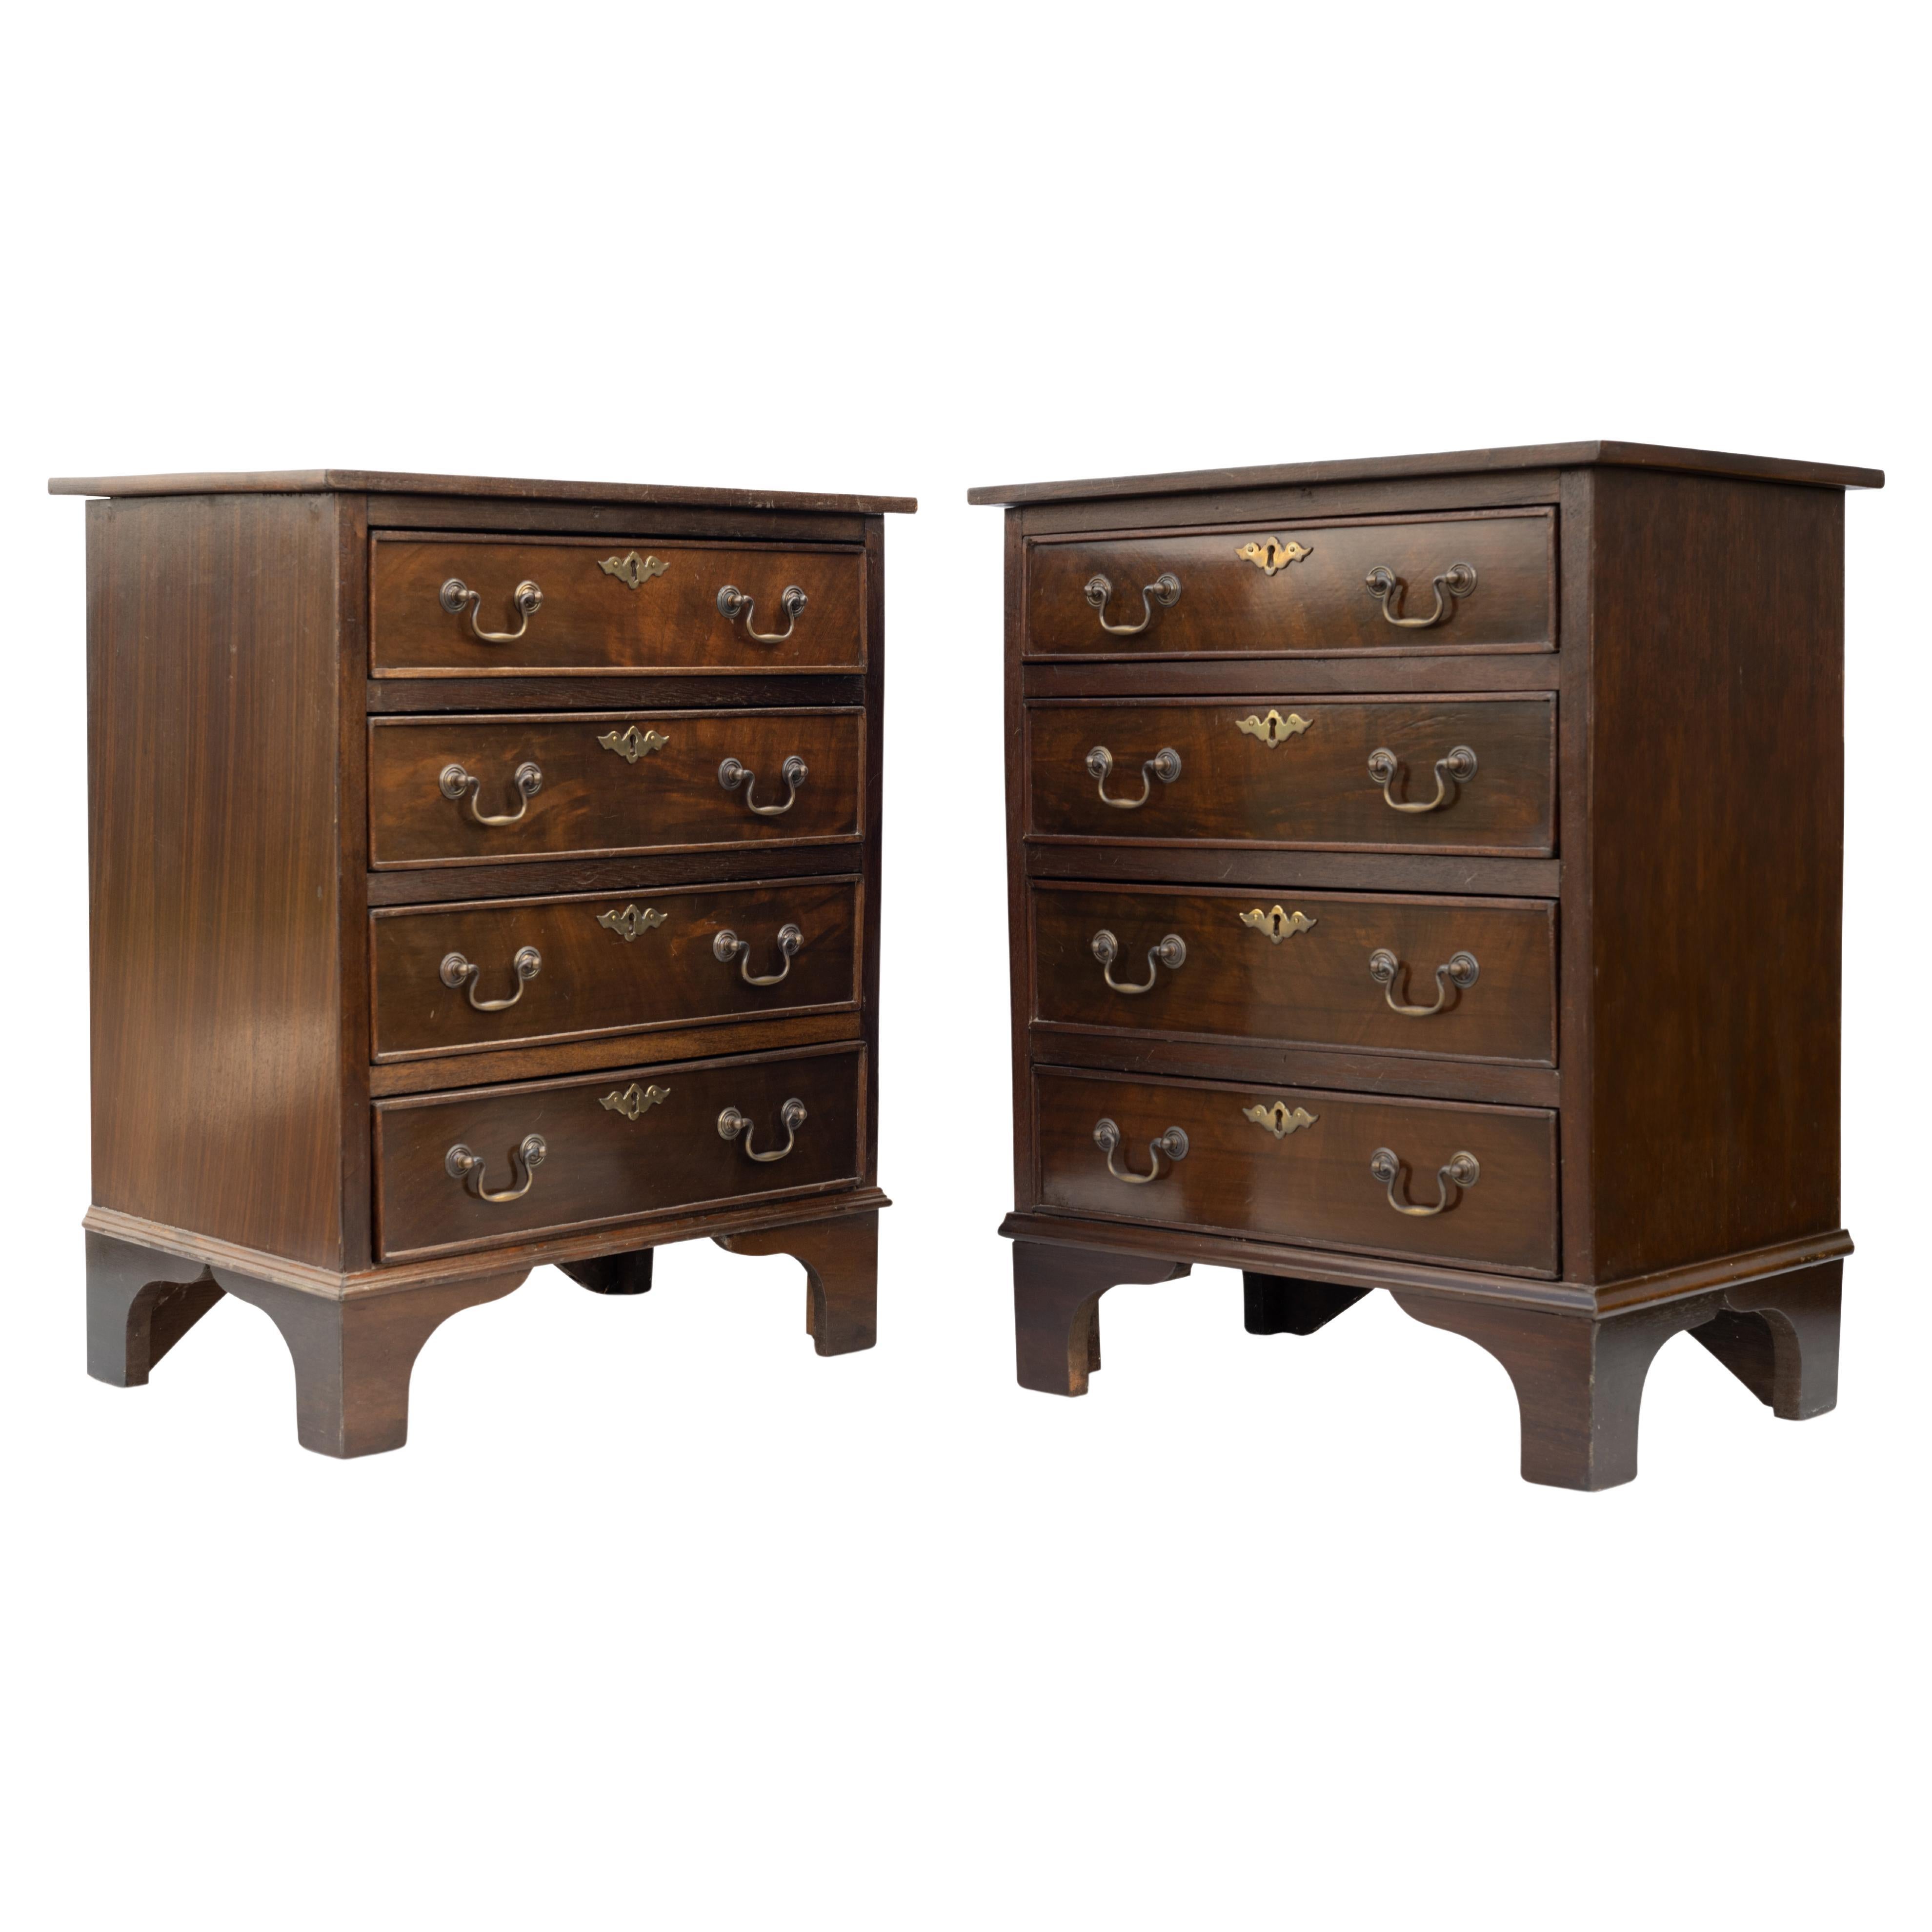 Georgian Design Pair of Antique Bedside Chest of Drawers & Brass Batwing Handles